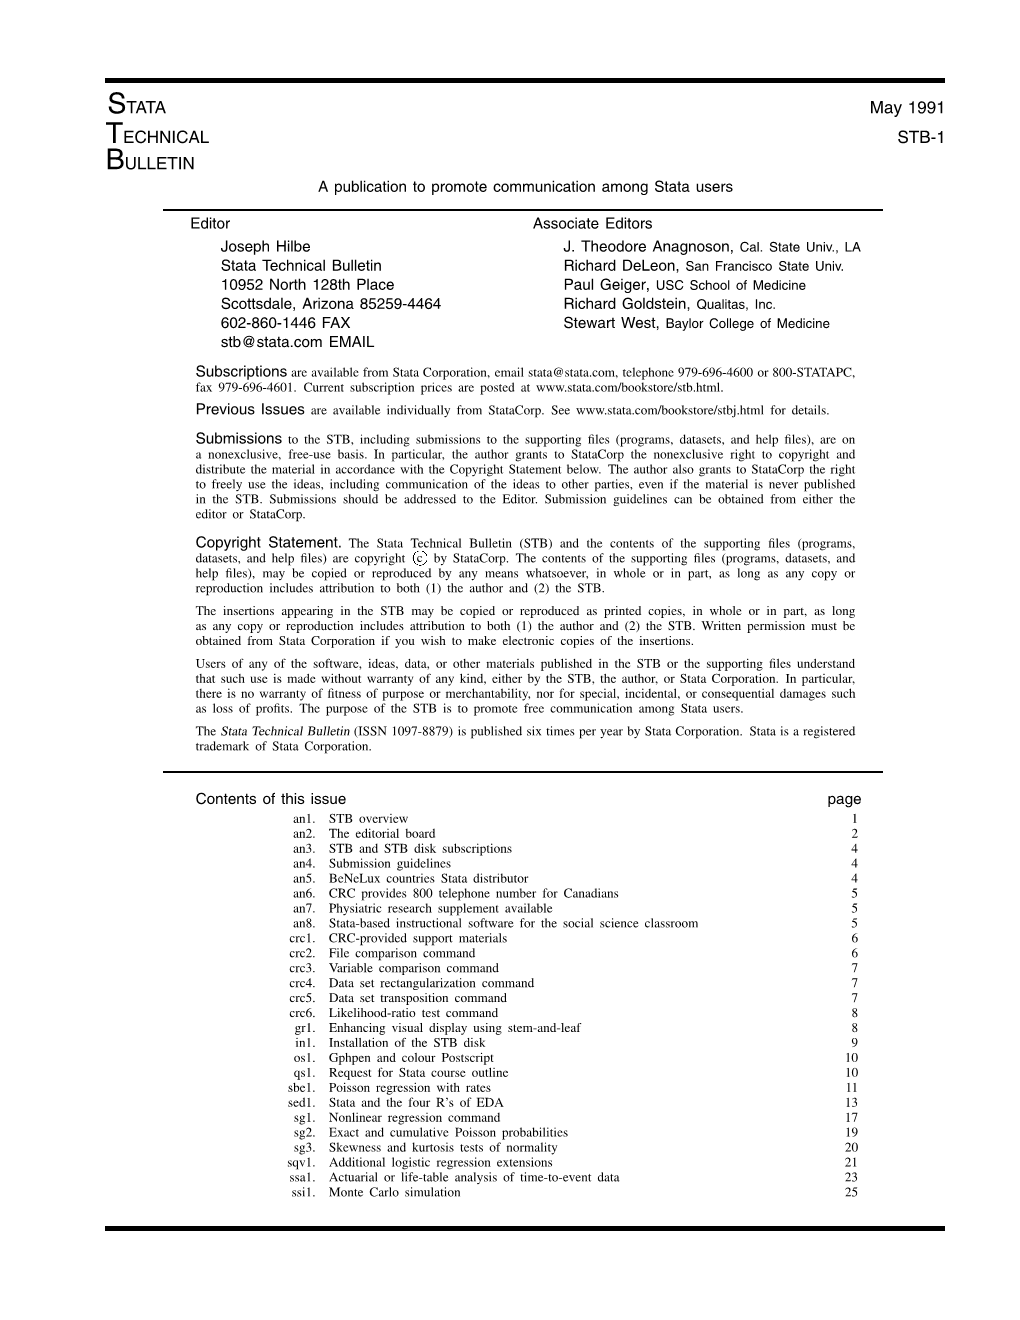 STATA May 1991 TECHNICAL STB-1 BULLETIN a Publication to Promote Communication Among Stata Users